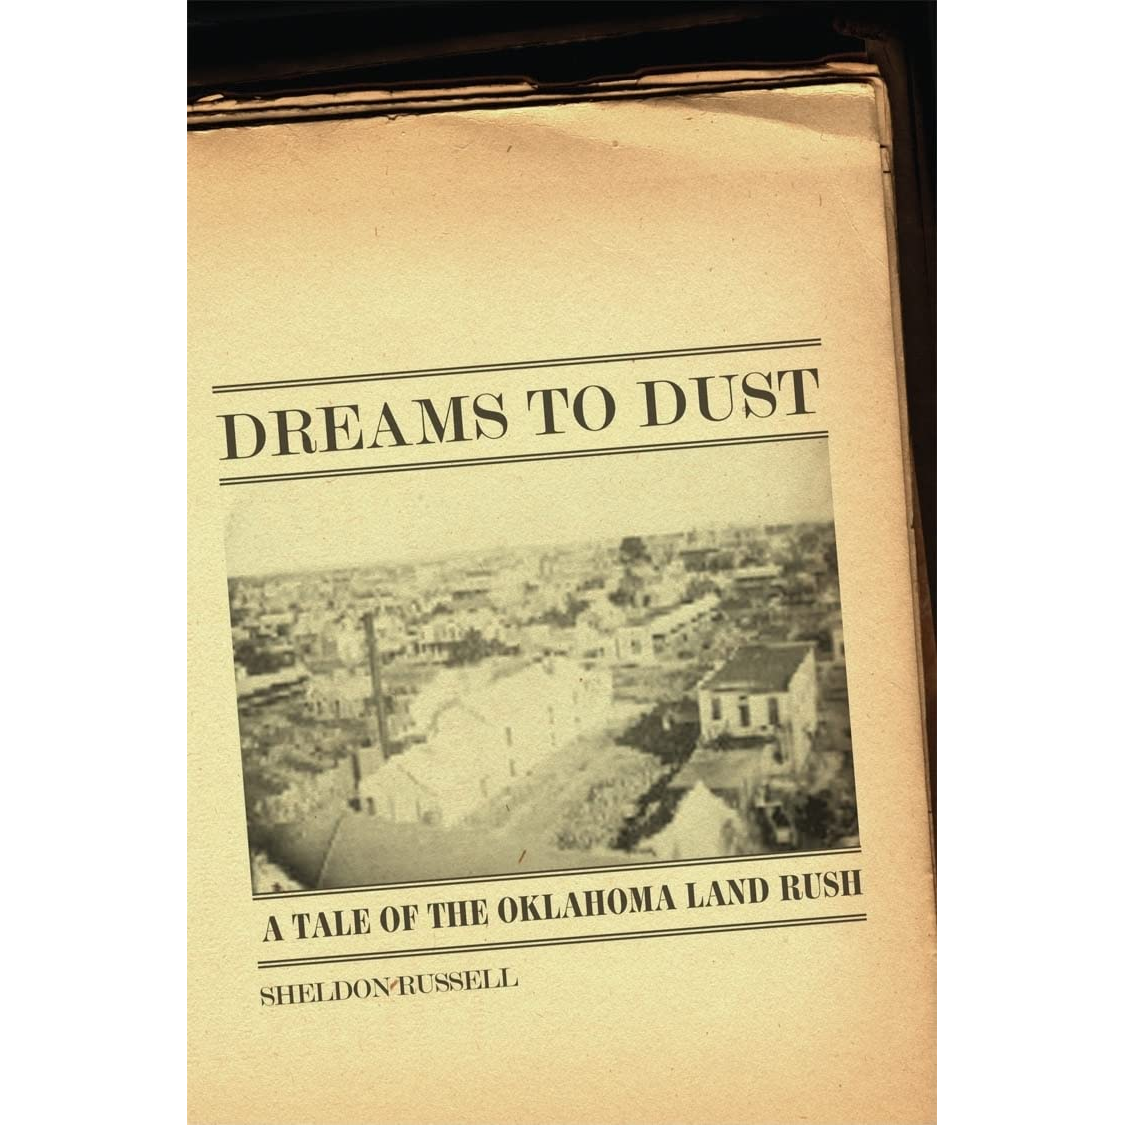 Dreams to Dust: A Tale of the Oklahoma Land Rush